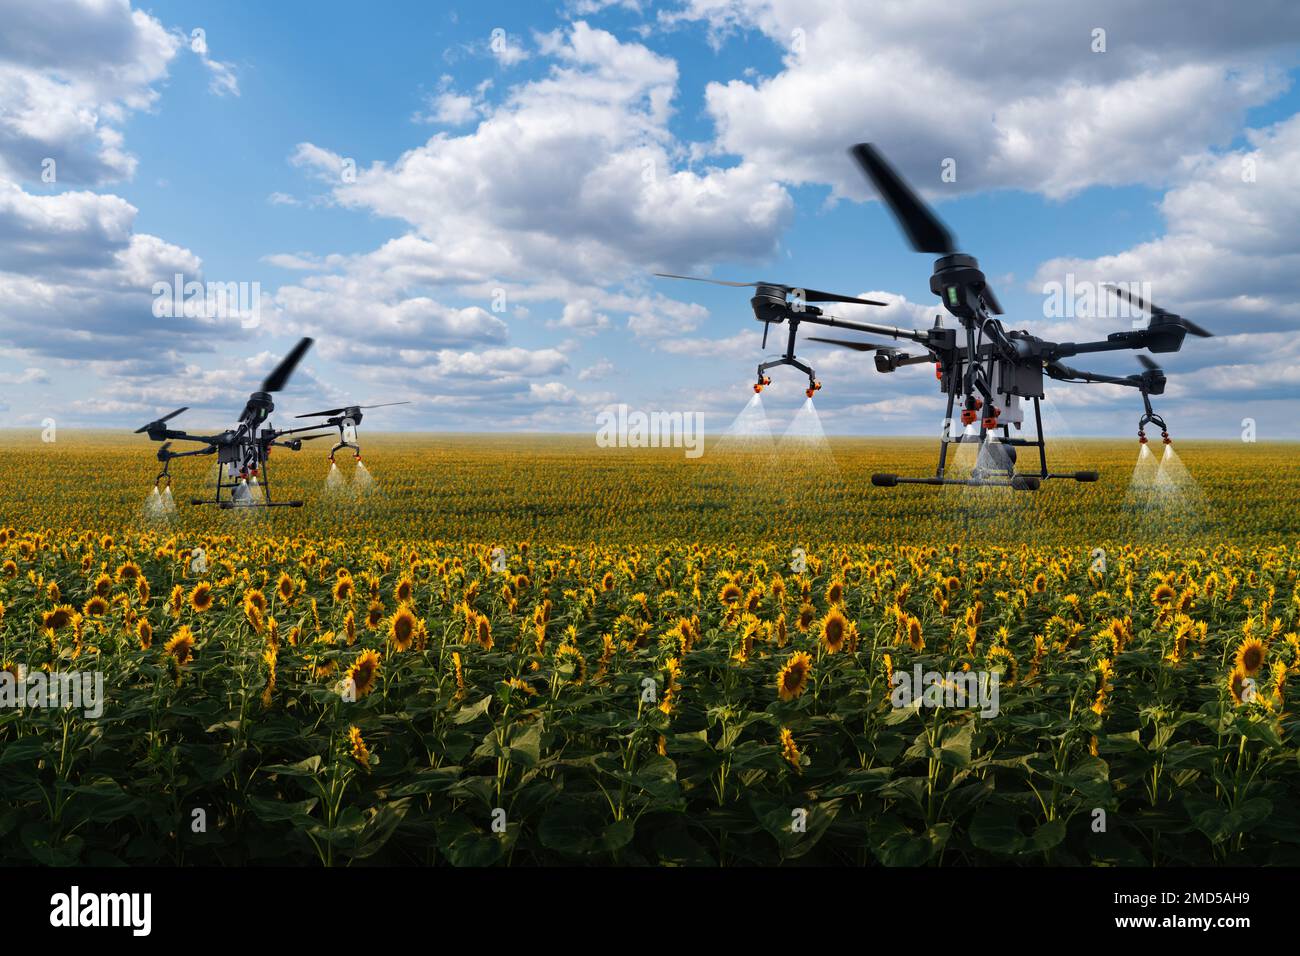 Drones sprayers flies over the agricultural field. Smart farming and precision agriculture Stock Photo